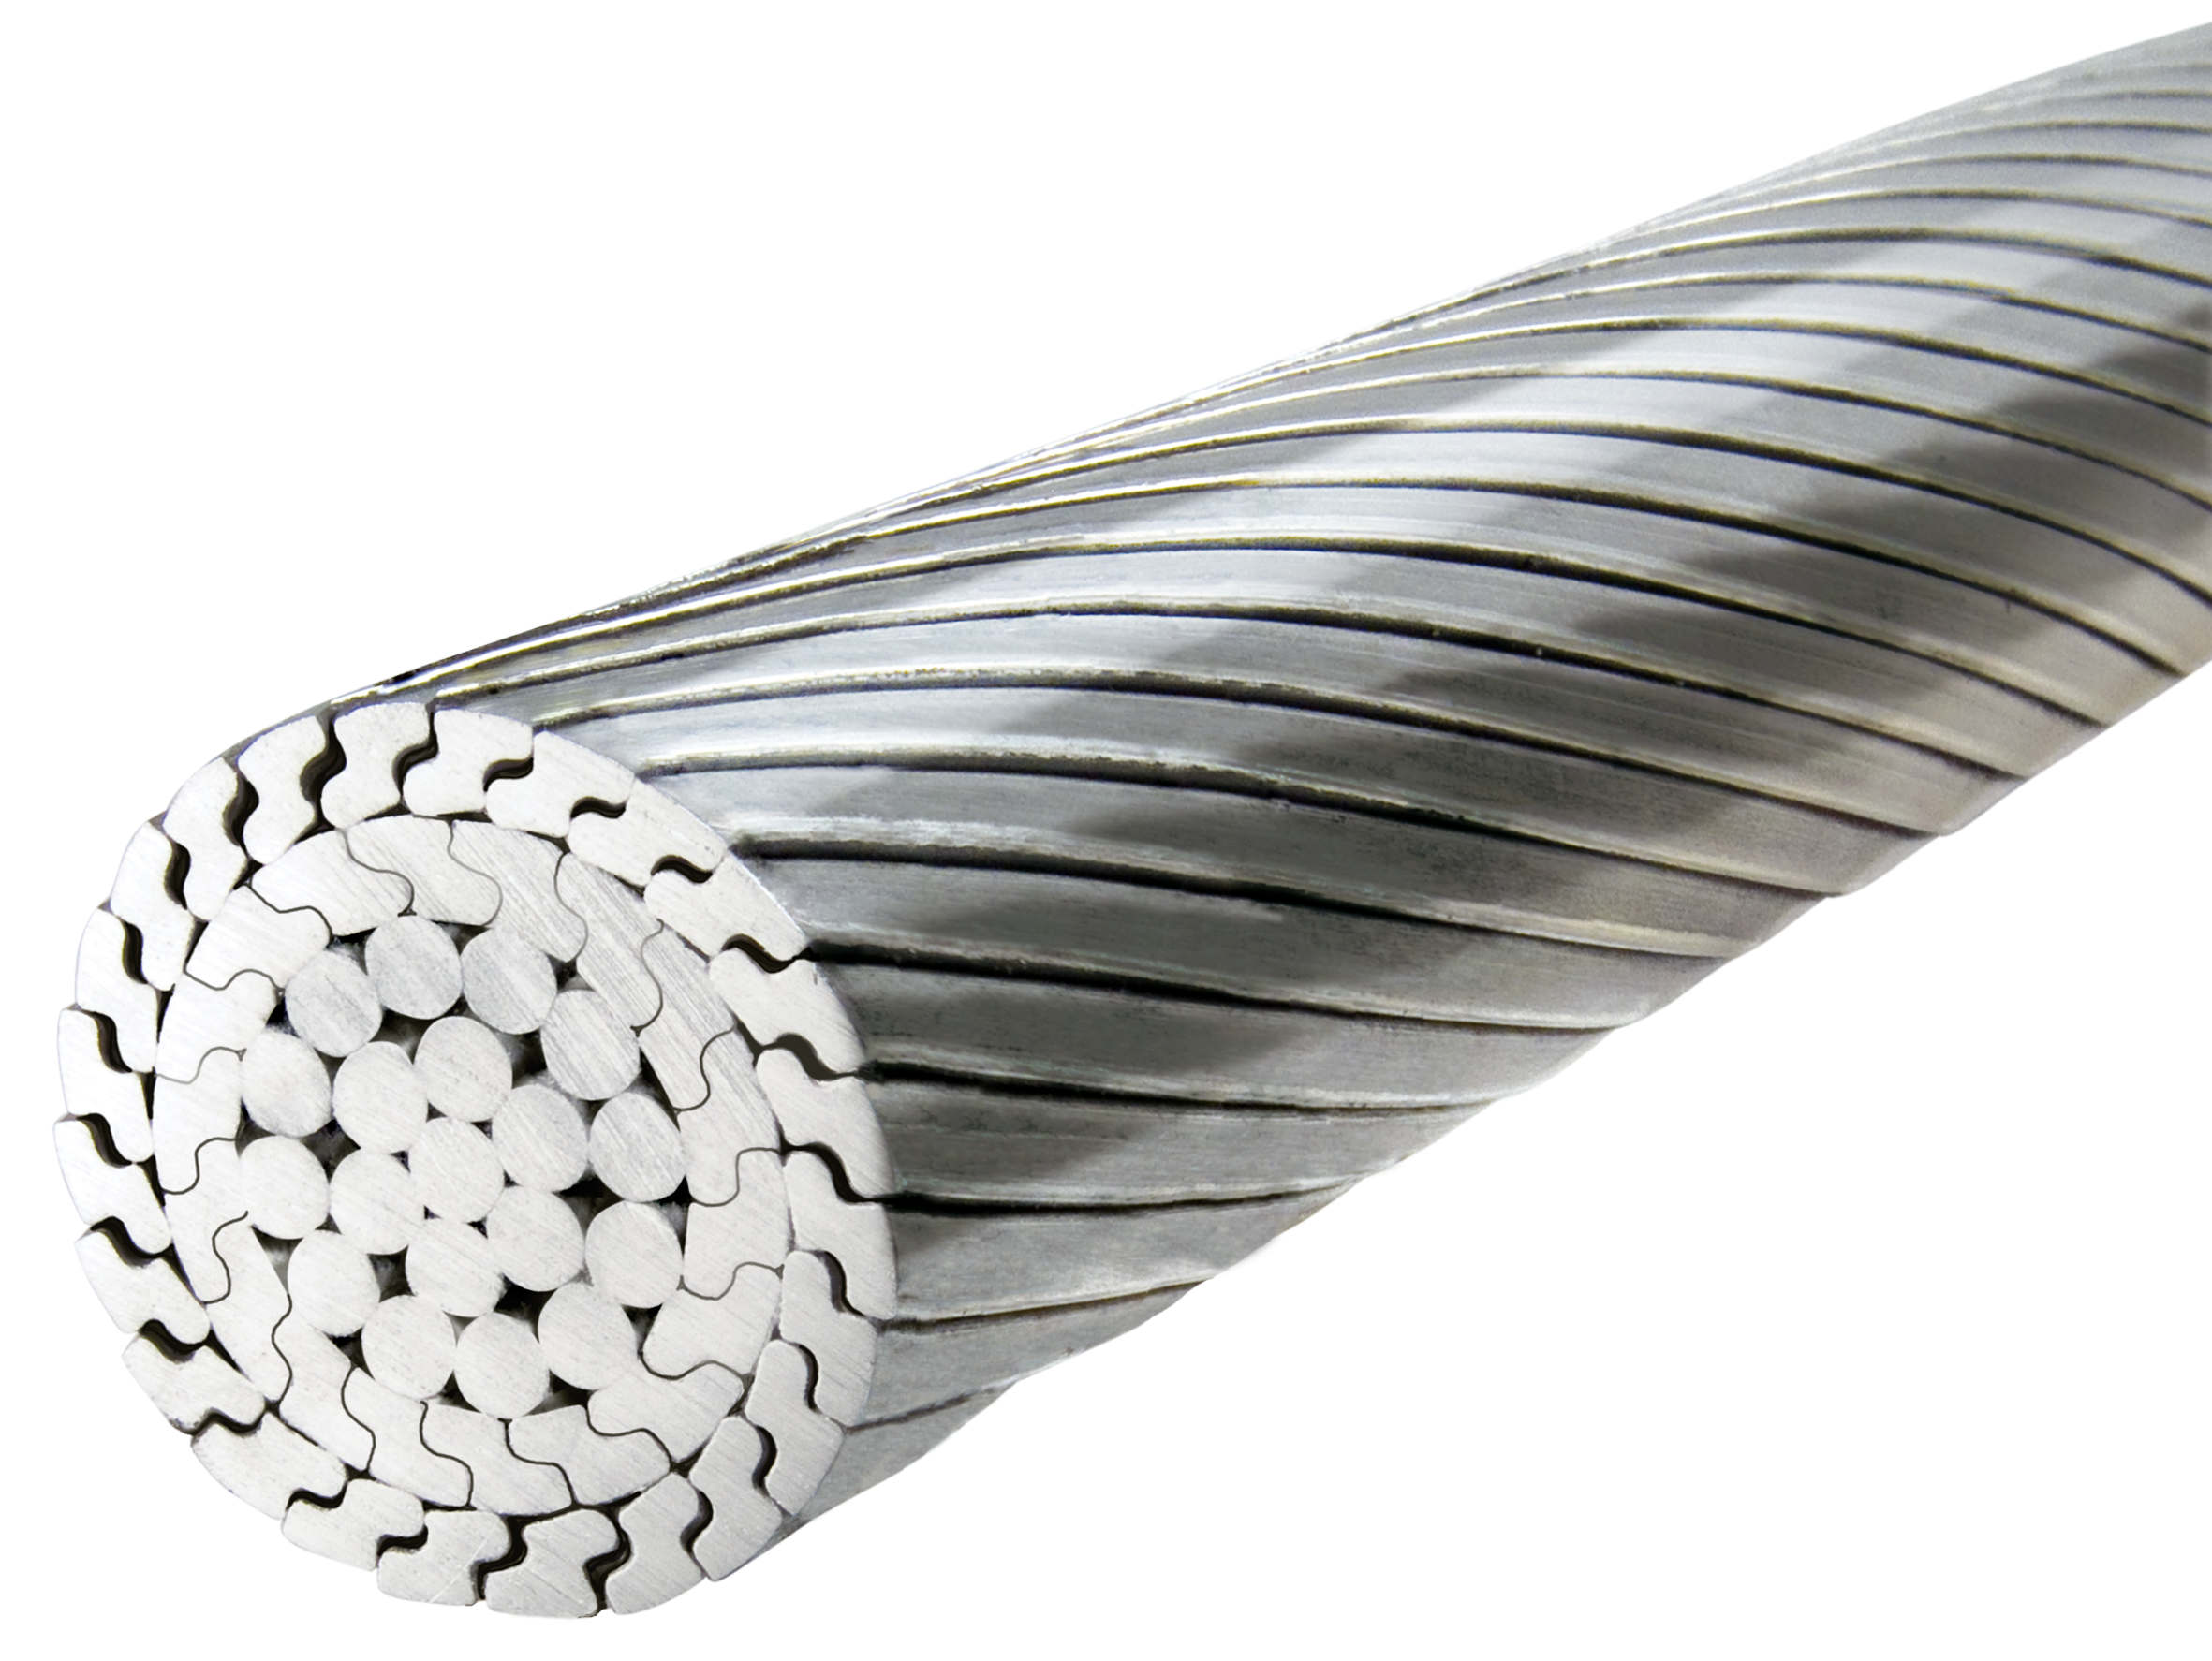 Cable material